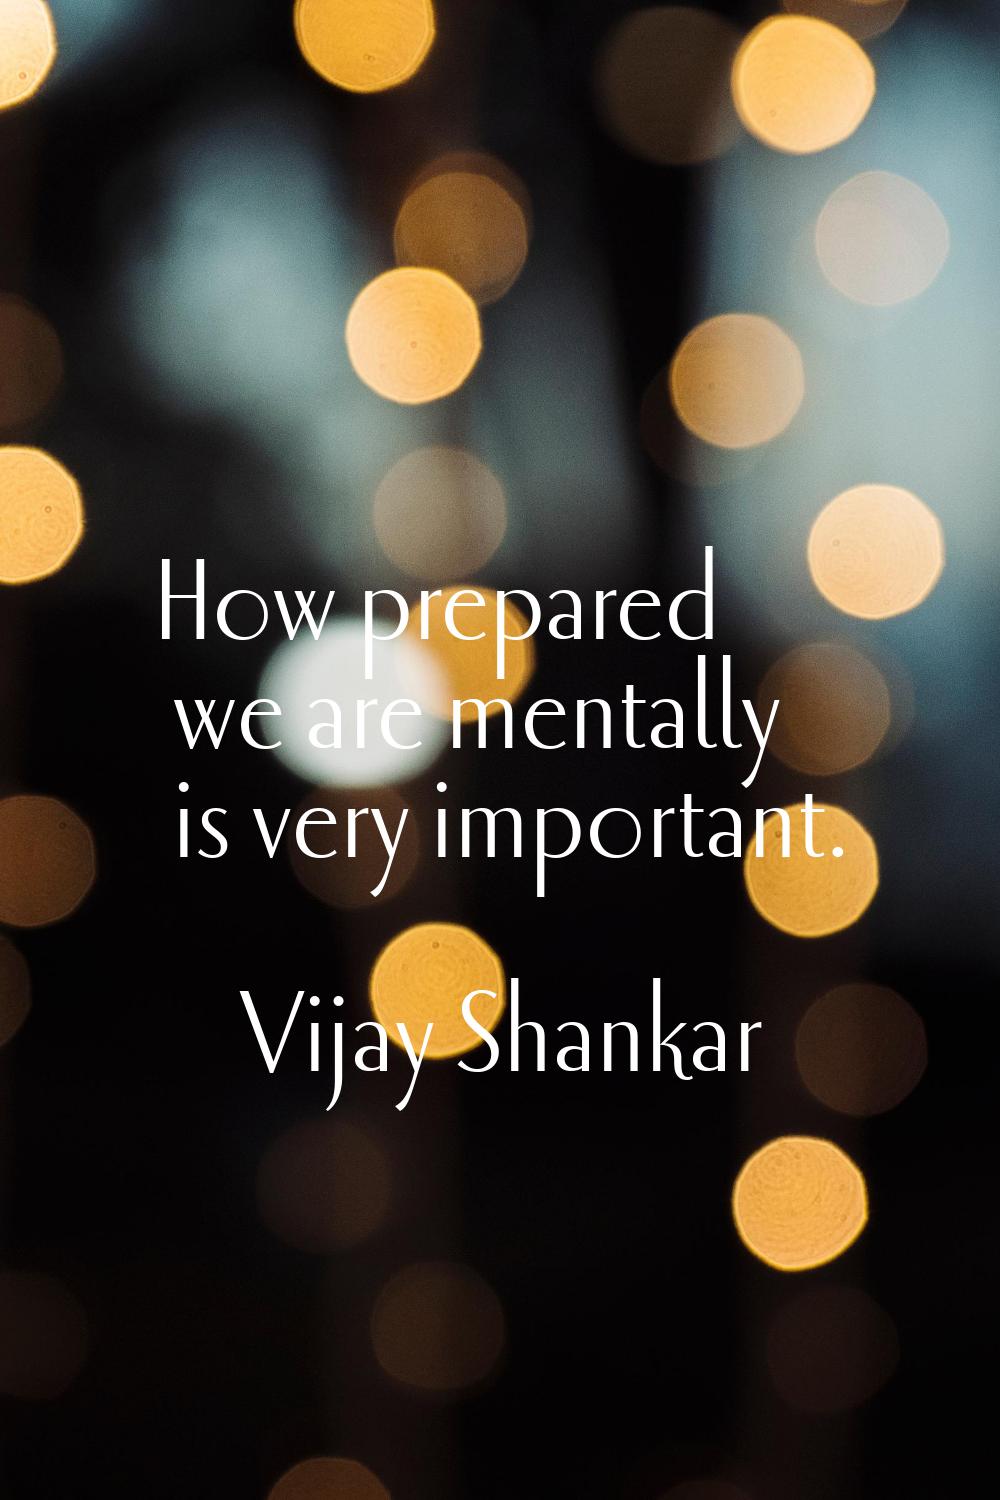 How prepared we are mentally is very important.